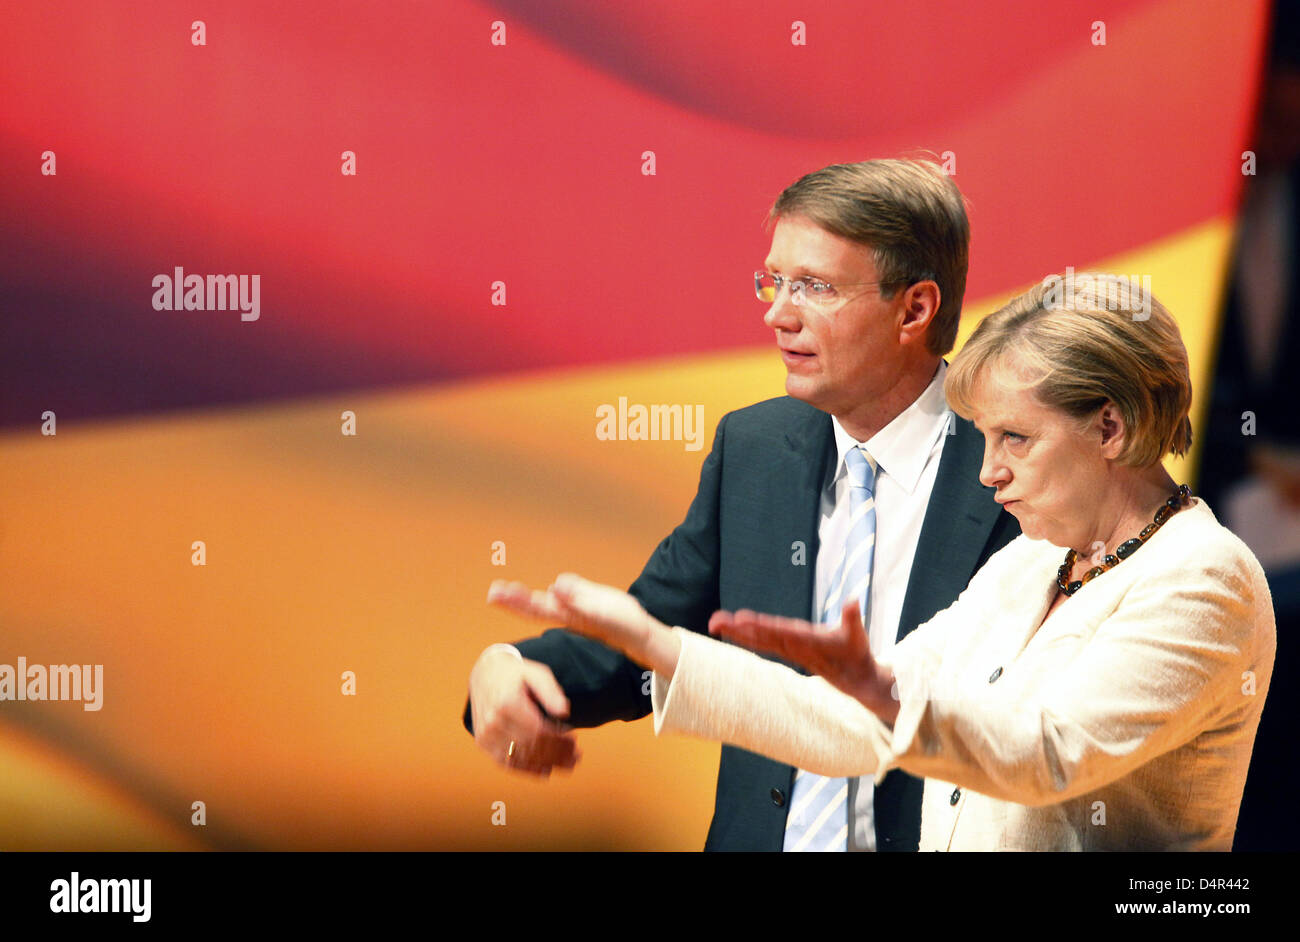 German Chancellor Angela Merkel and secretary general Ronald Pofalla of the Christian Democratic Union (CDU) wave to their supporters after a speech of Merkel at the party?s final election campaign event in Berlin, Germany, 26 September 2009. The German federal elections are held on 27 September 2009. Photo: HANNIBAL Stock Photo